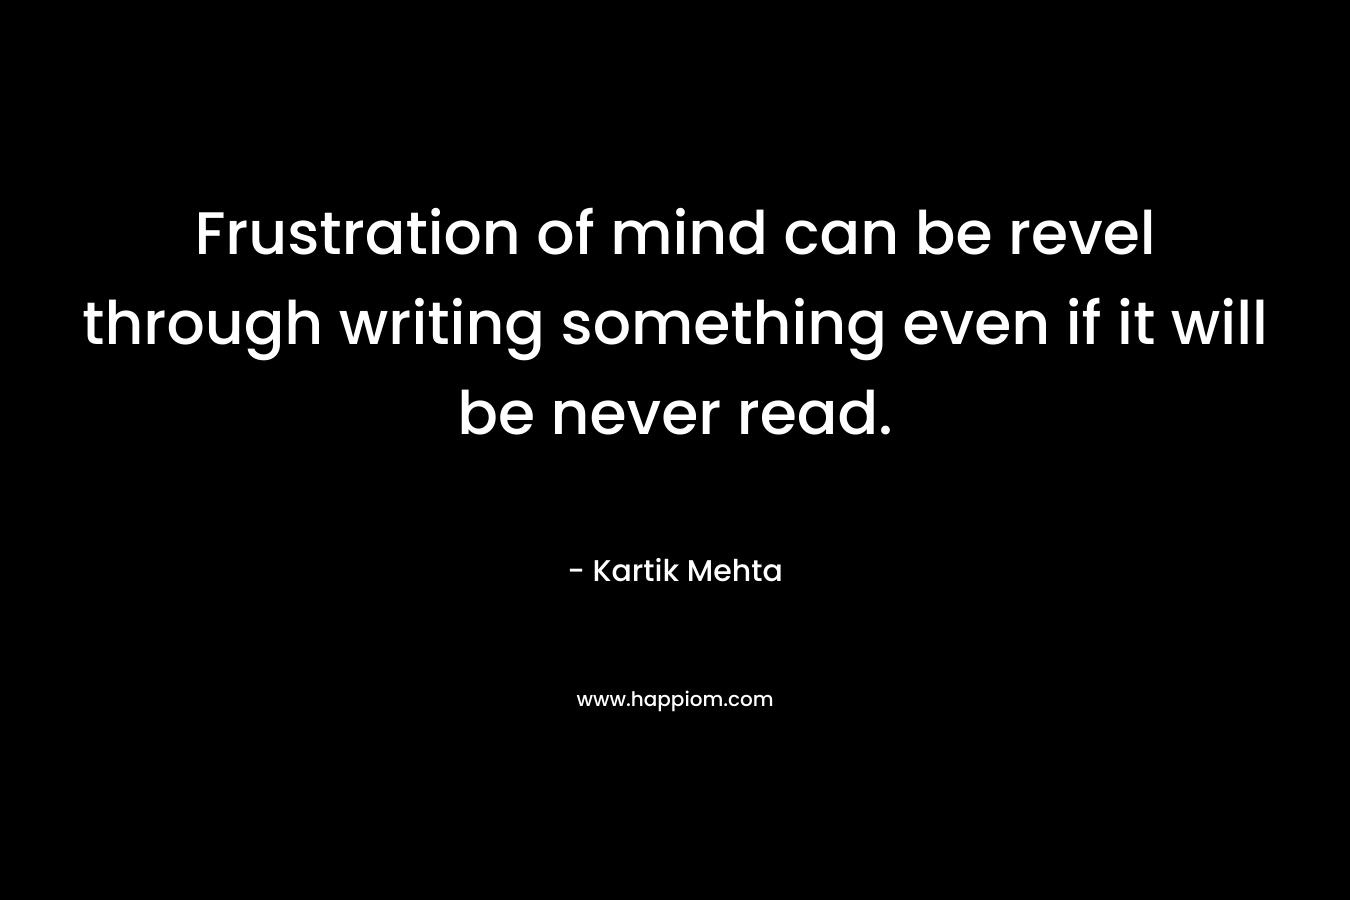 Frustration of mind can be revel through writing something even if it will be never read. – Kartik Mehta